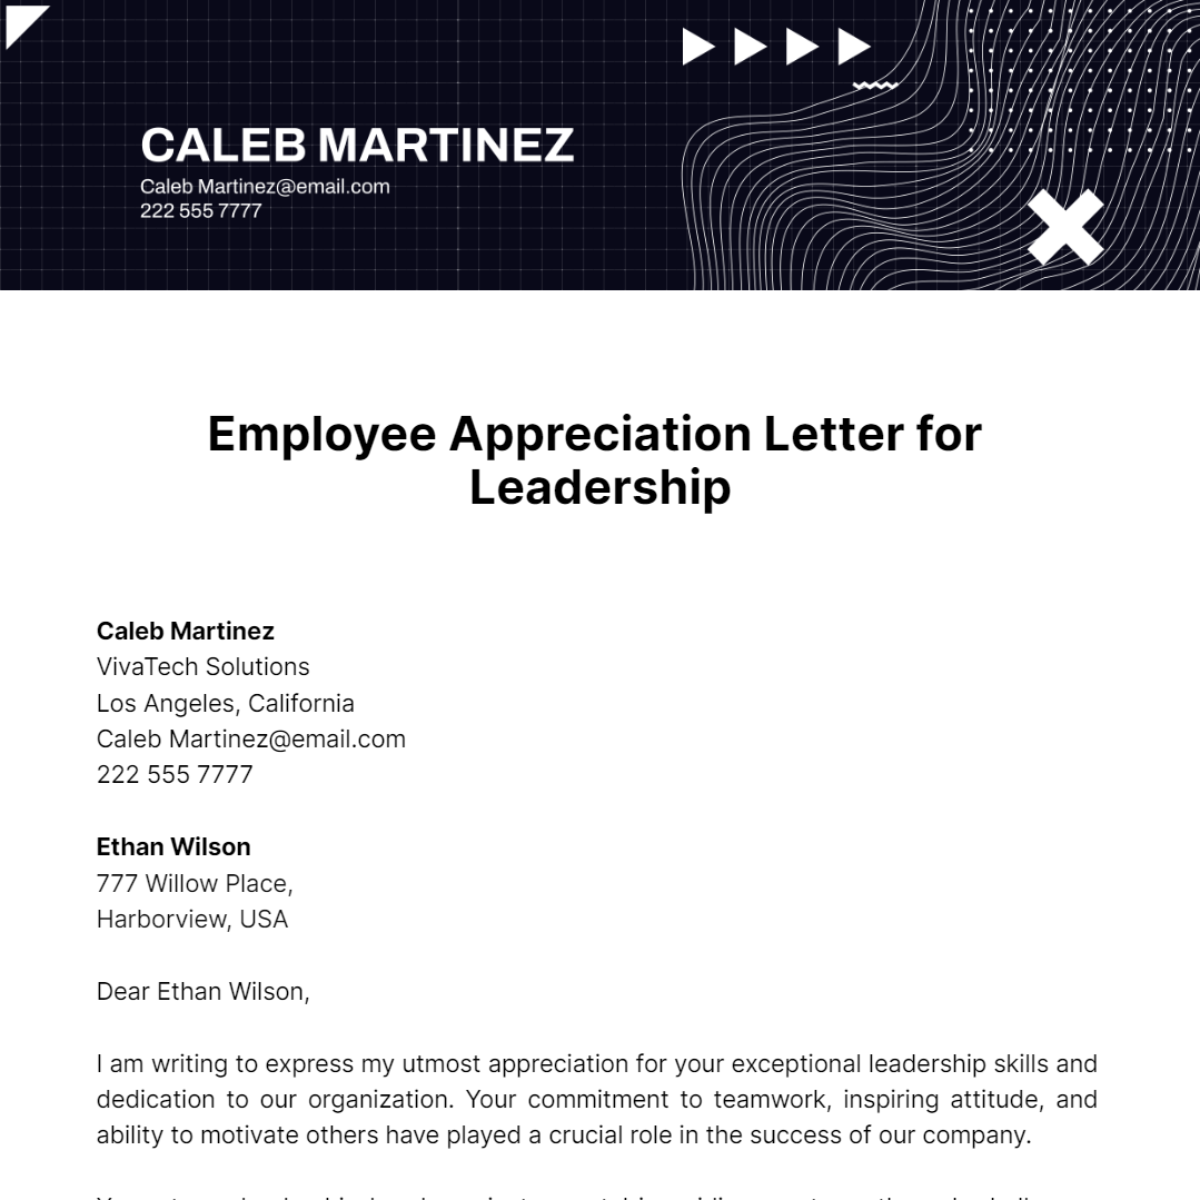 Employee Appreciation Letter For Leadership Template